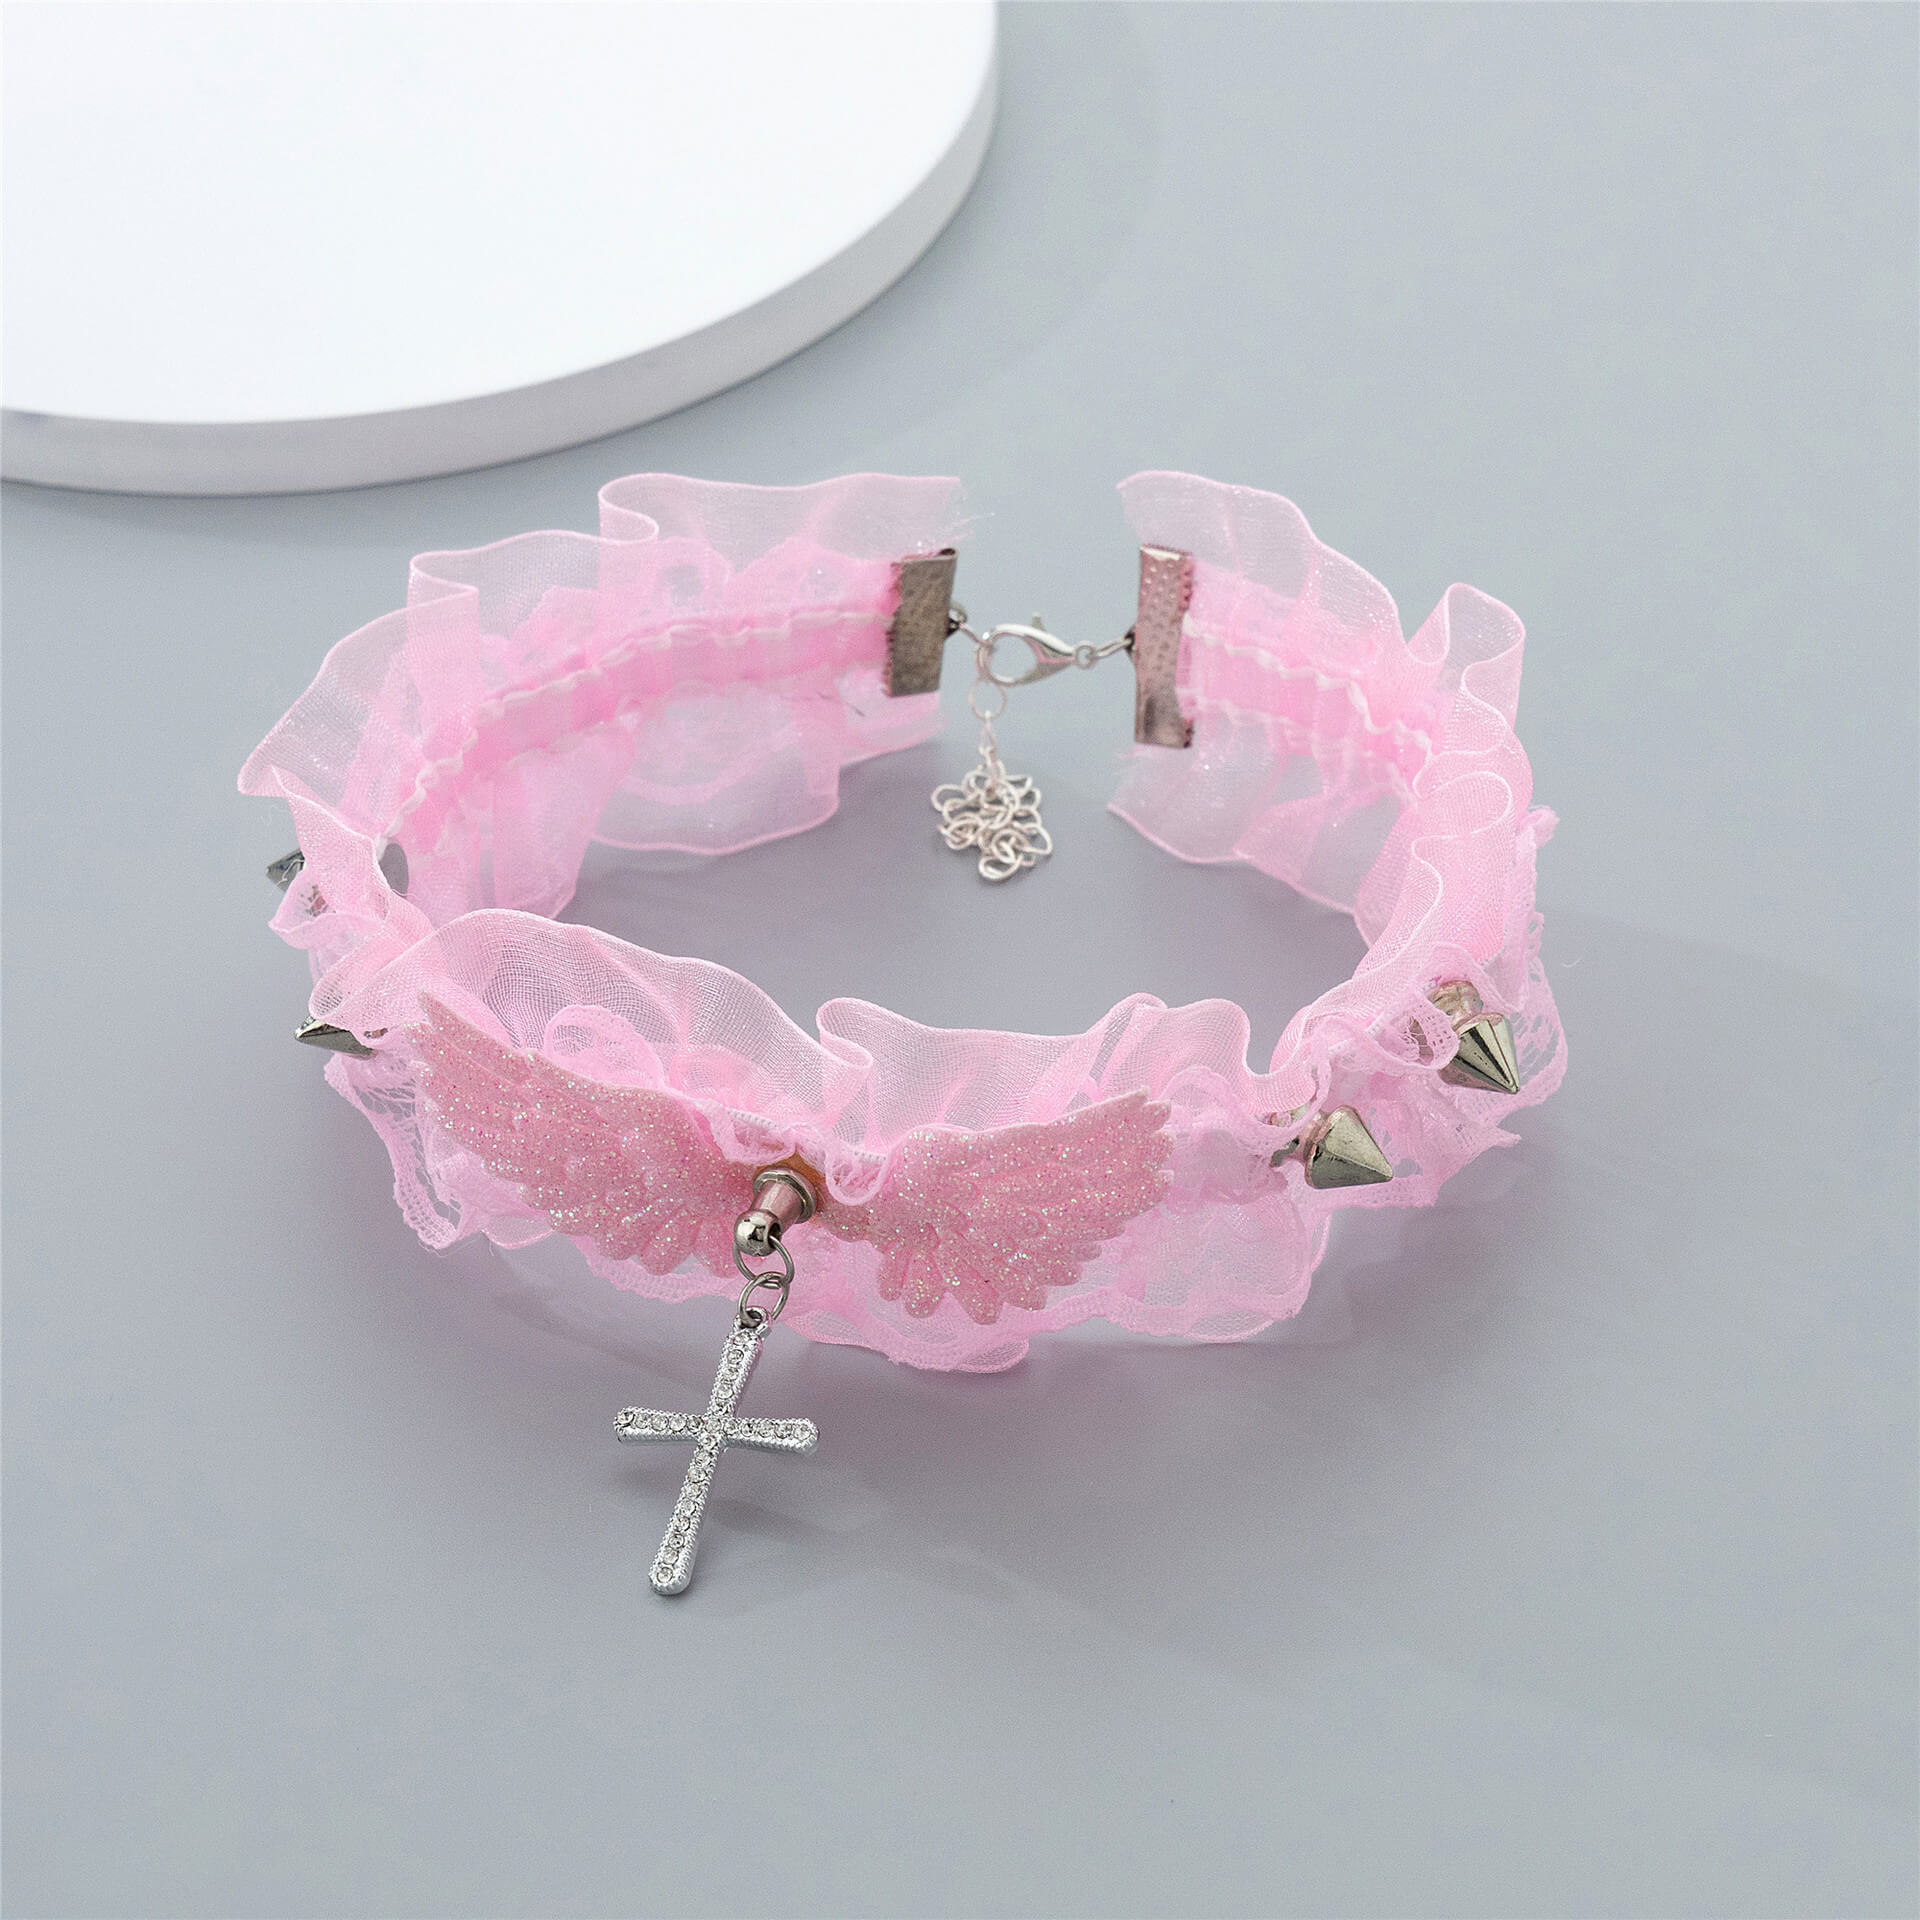 Pink Choker Necklace With A Cross - Femboy FashionChoker Necklace With A Cross